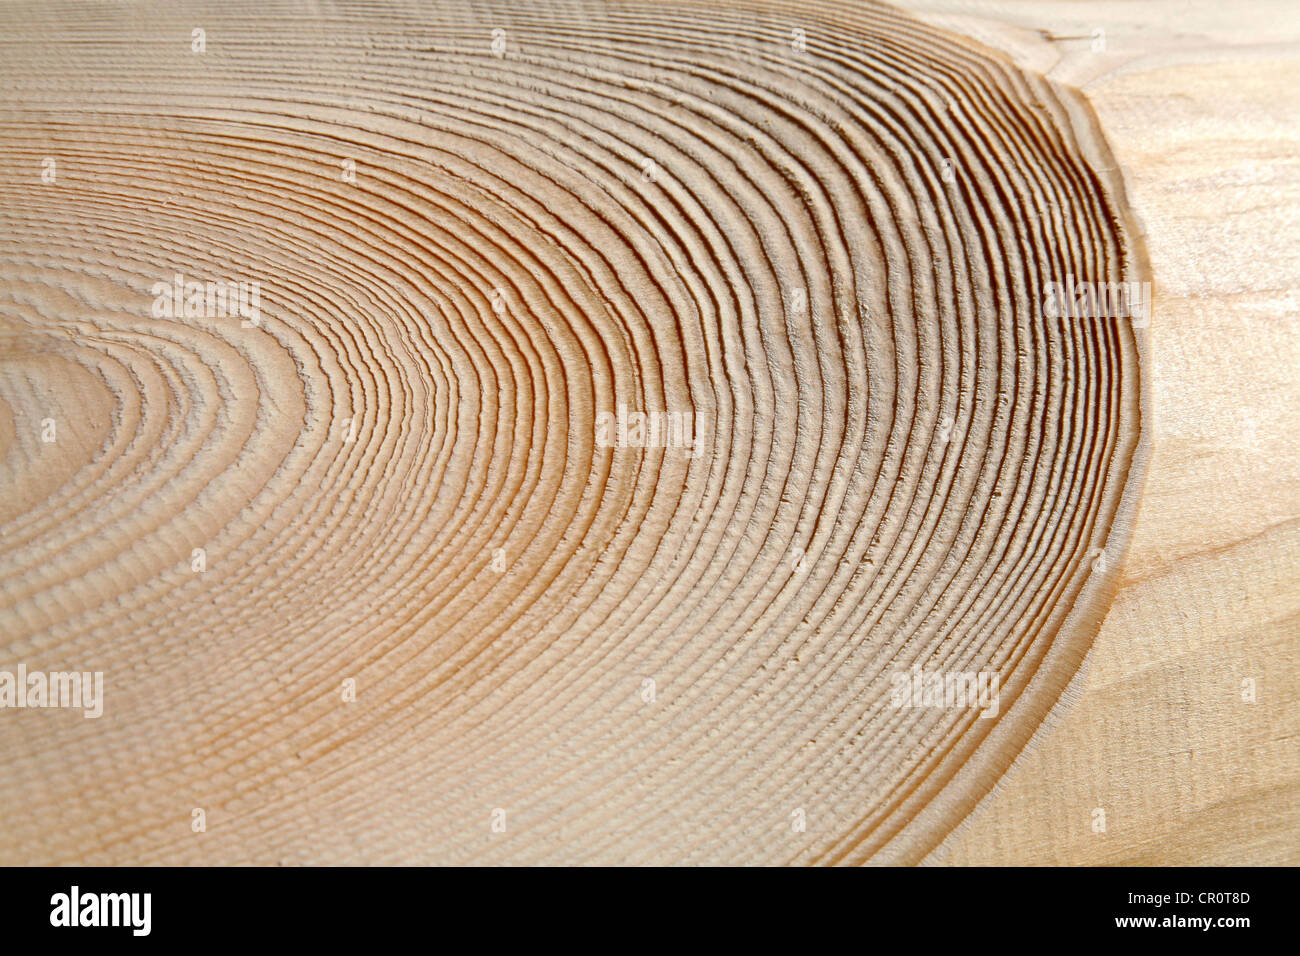 Annual rings of a tree trunk Stock Photo